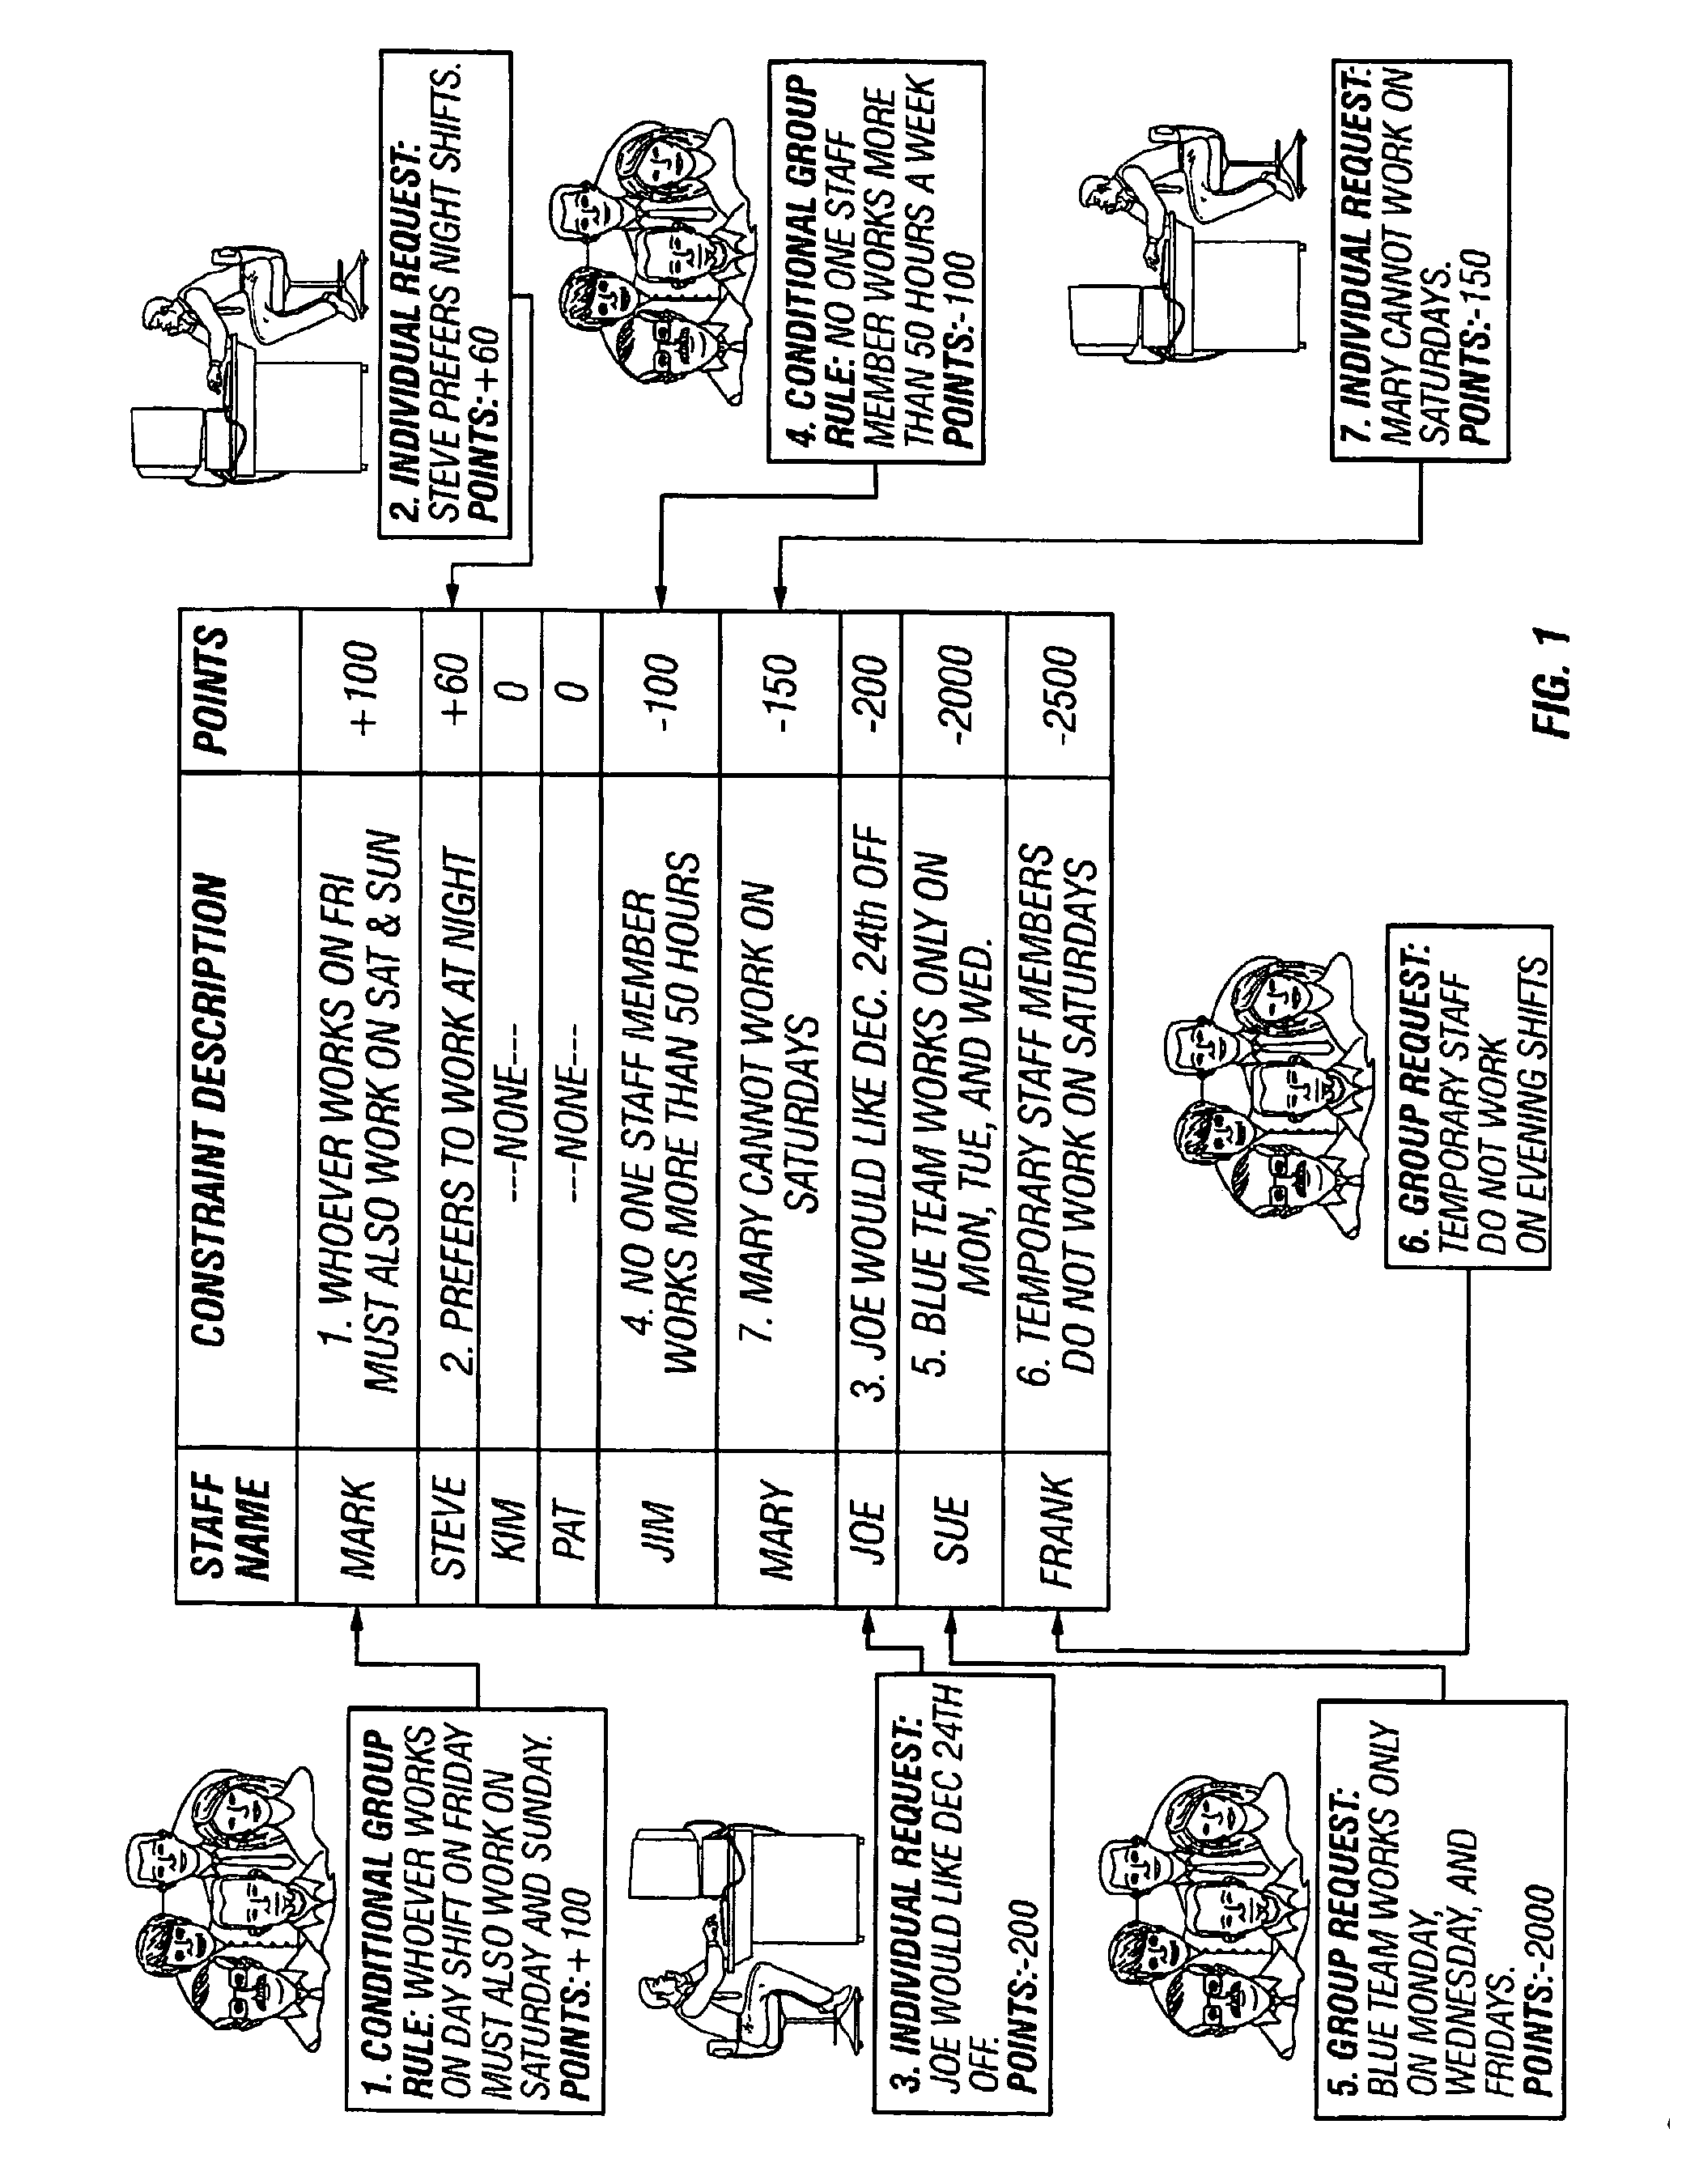 Method and Apparatus for Queue-Based Automated Staff Scheduling